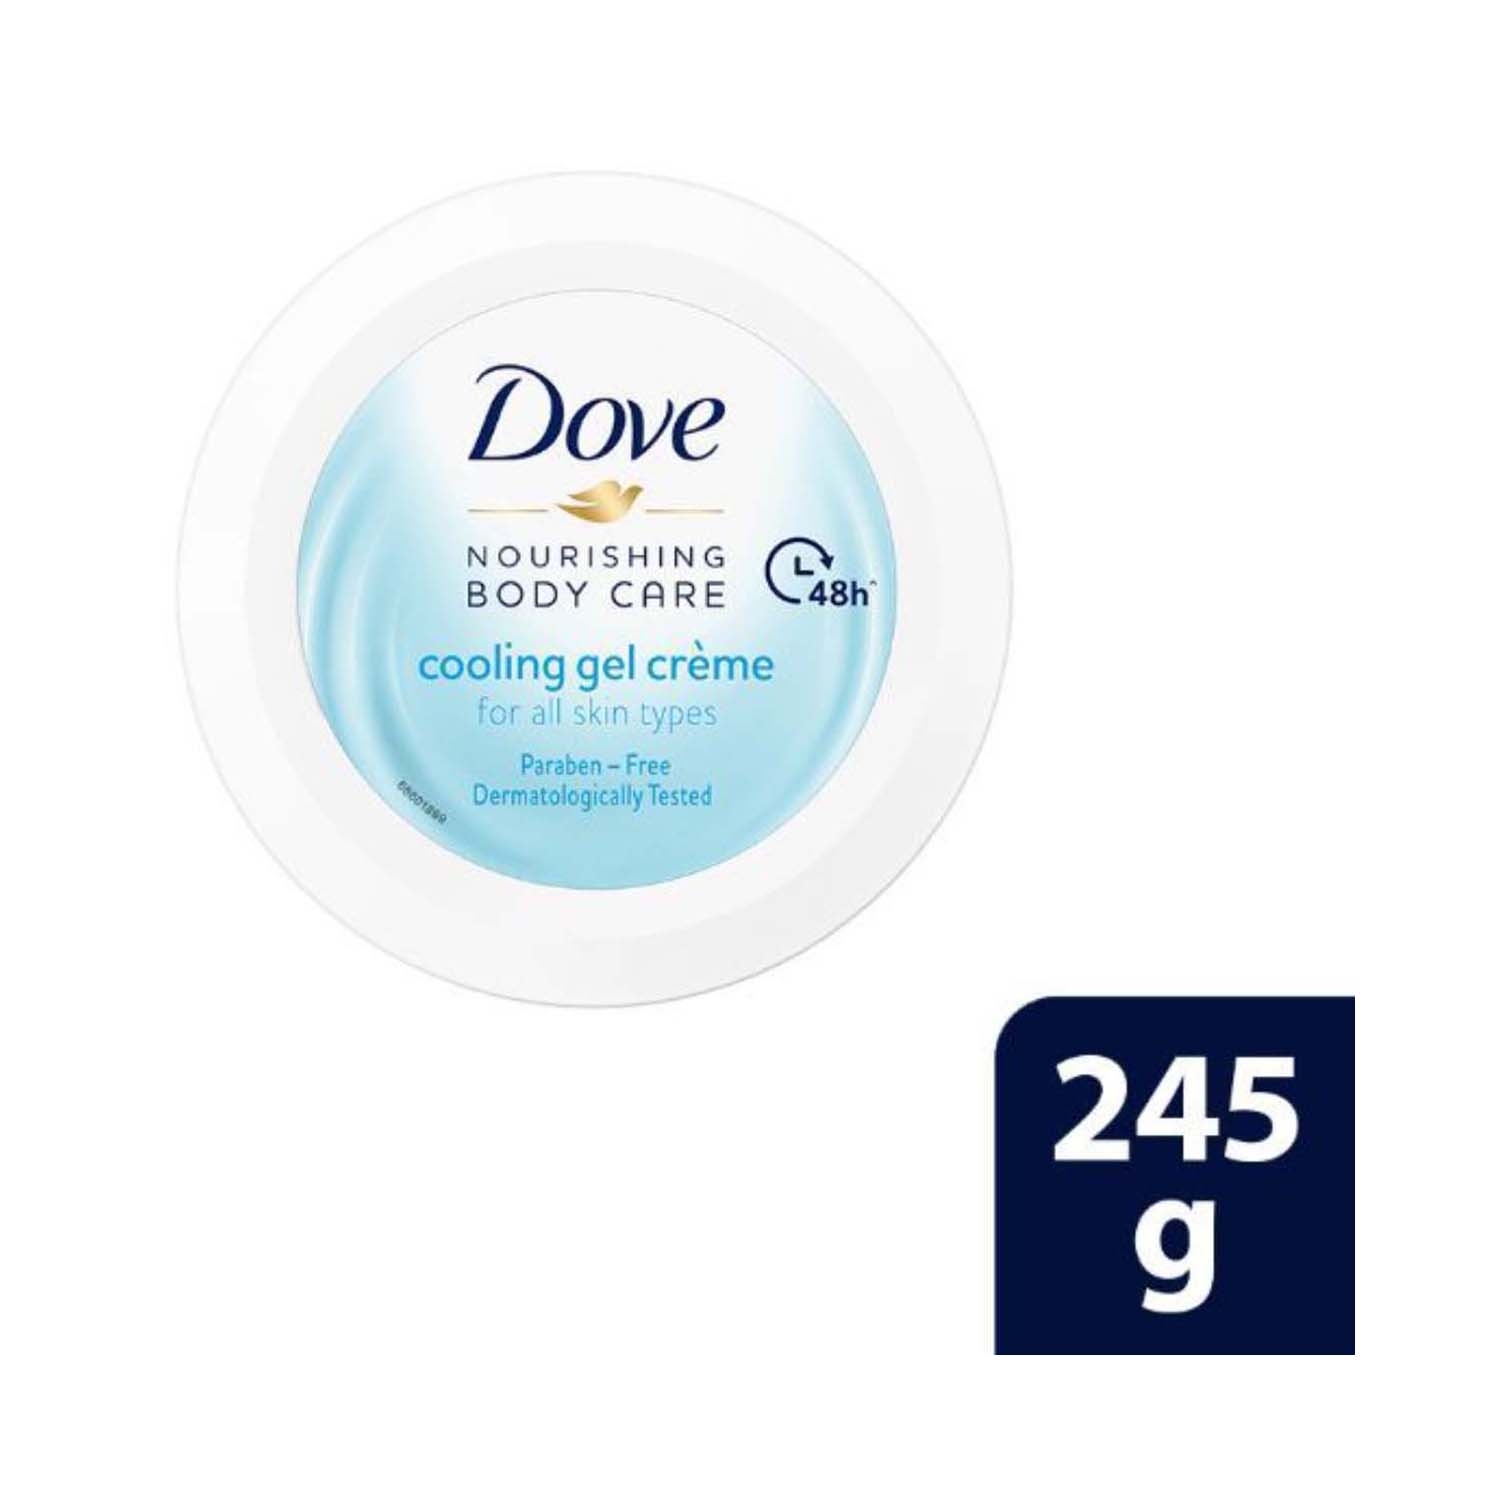 Dove | Dove 48 Hrs Nourishing Body Care Cooling Gel Creme (245g)